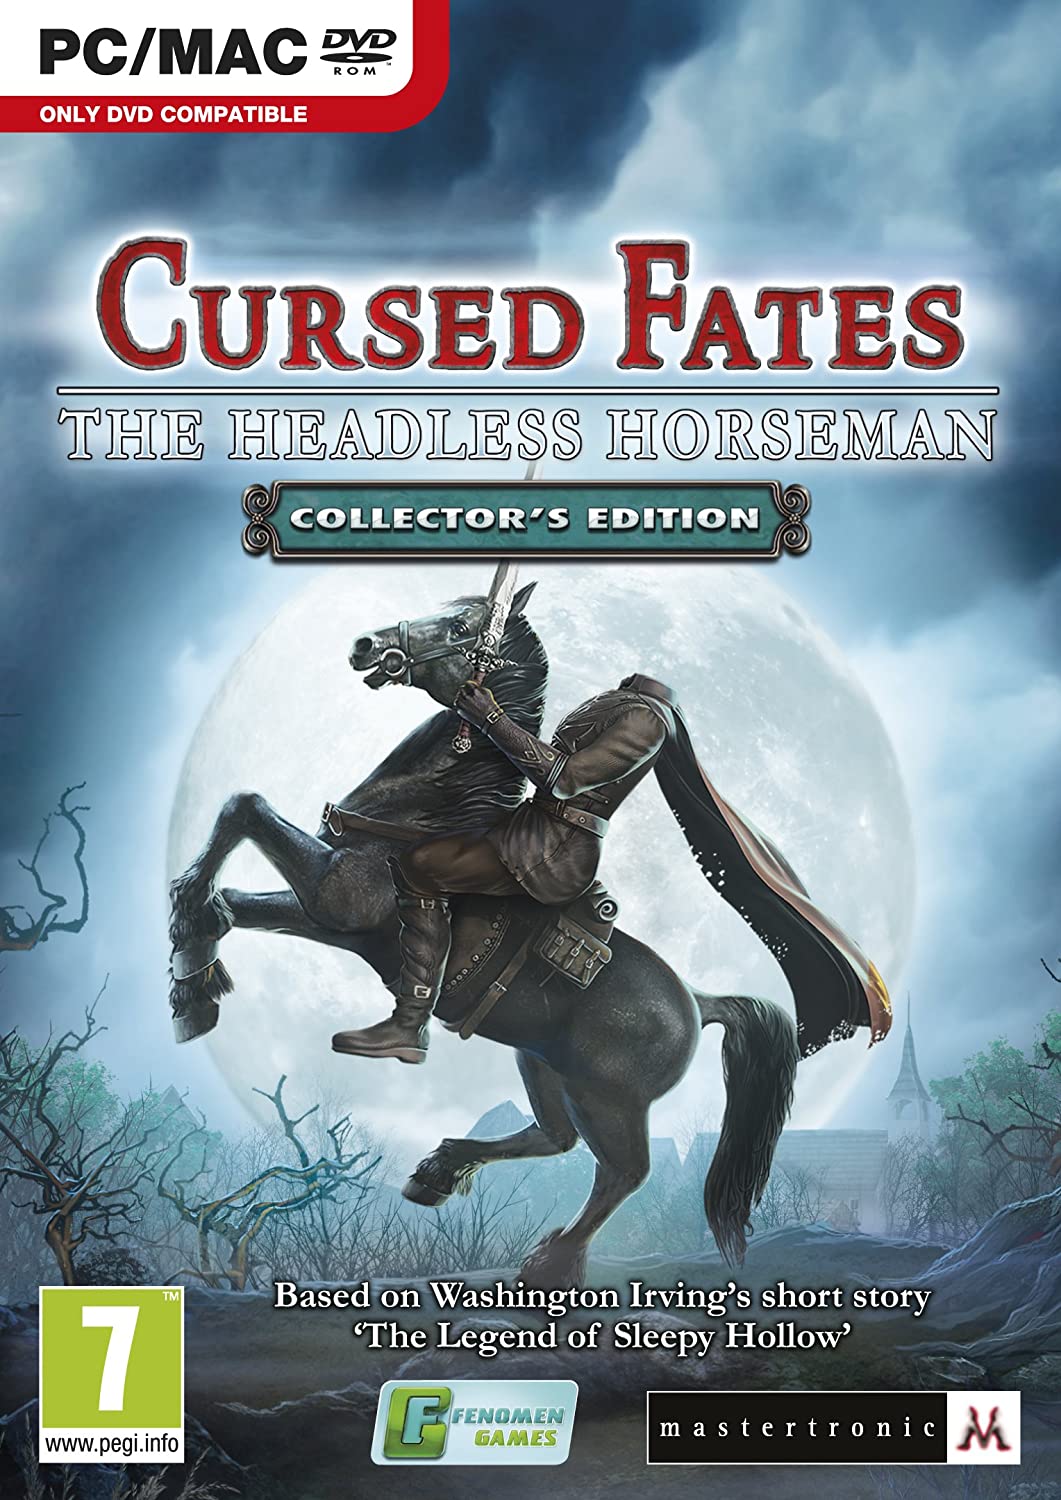 Cursed Fates: The Headless Horseman – Collector's Edition (PC DVD)